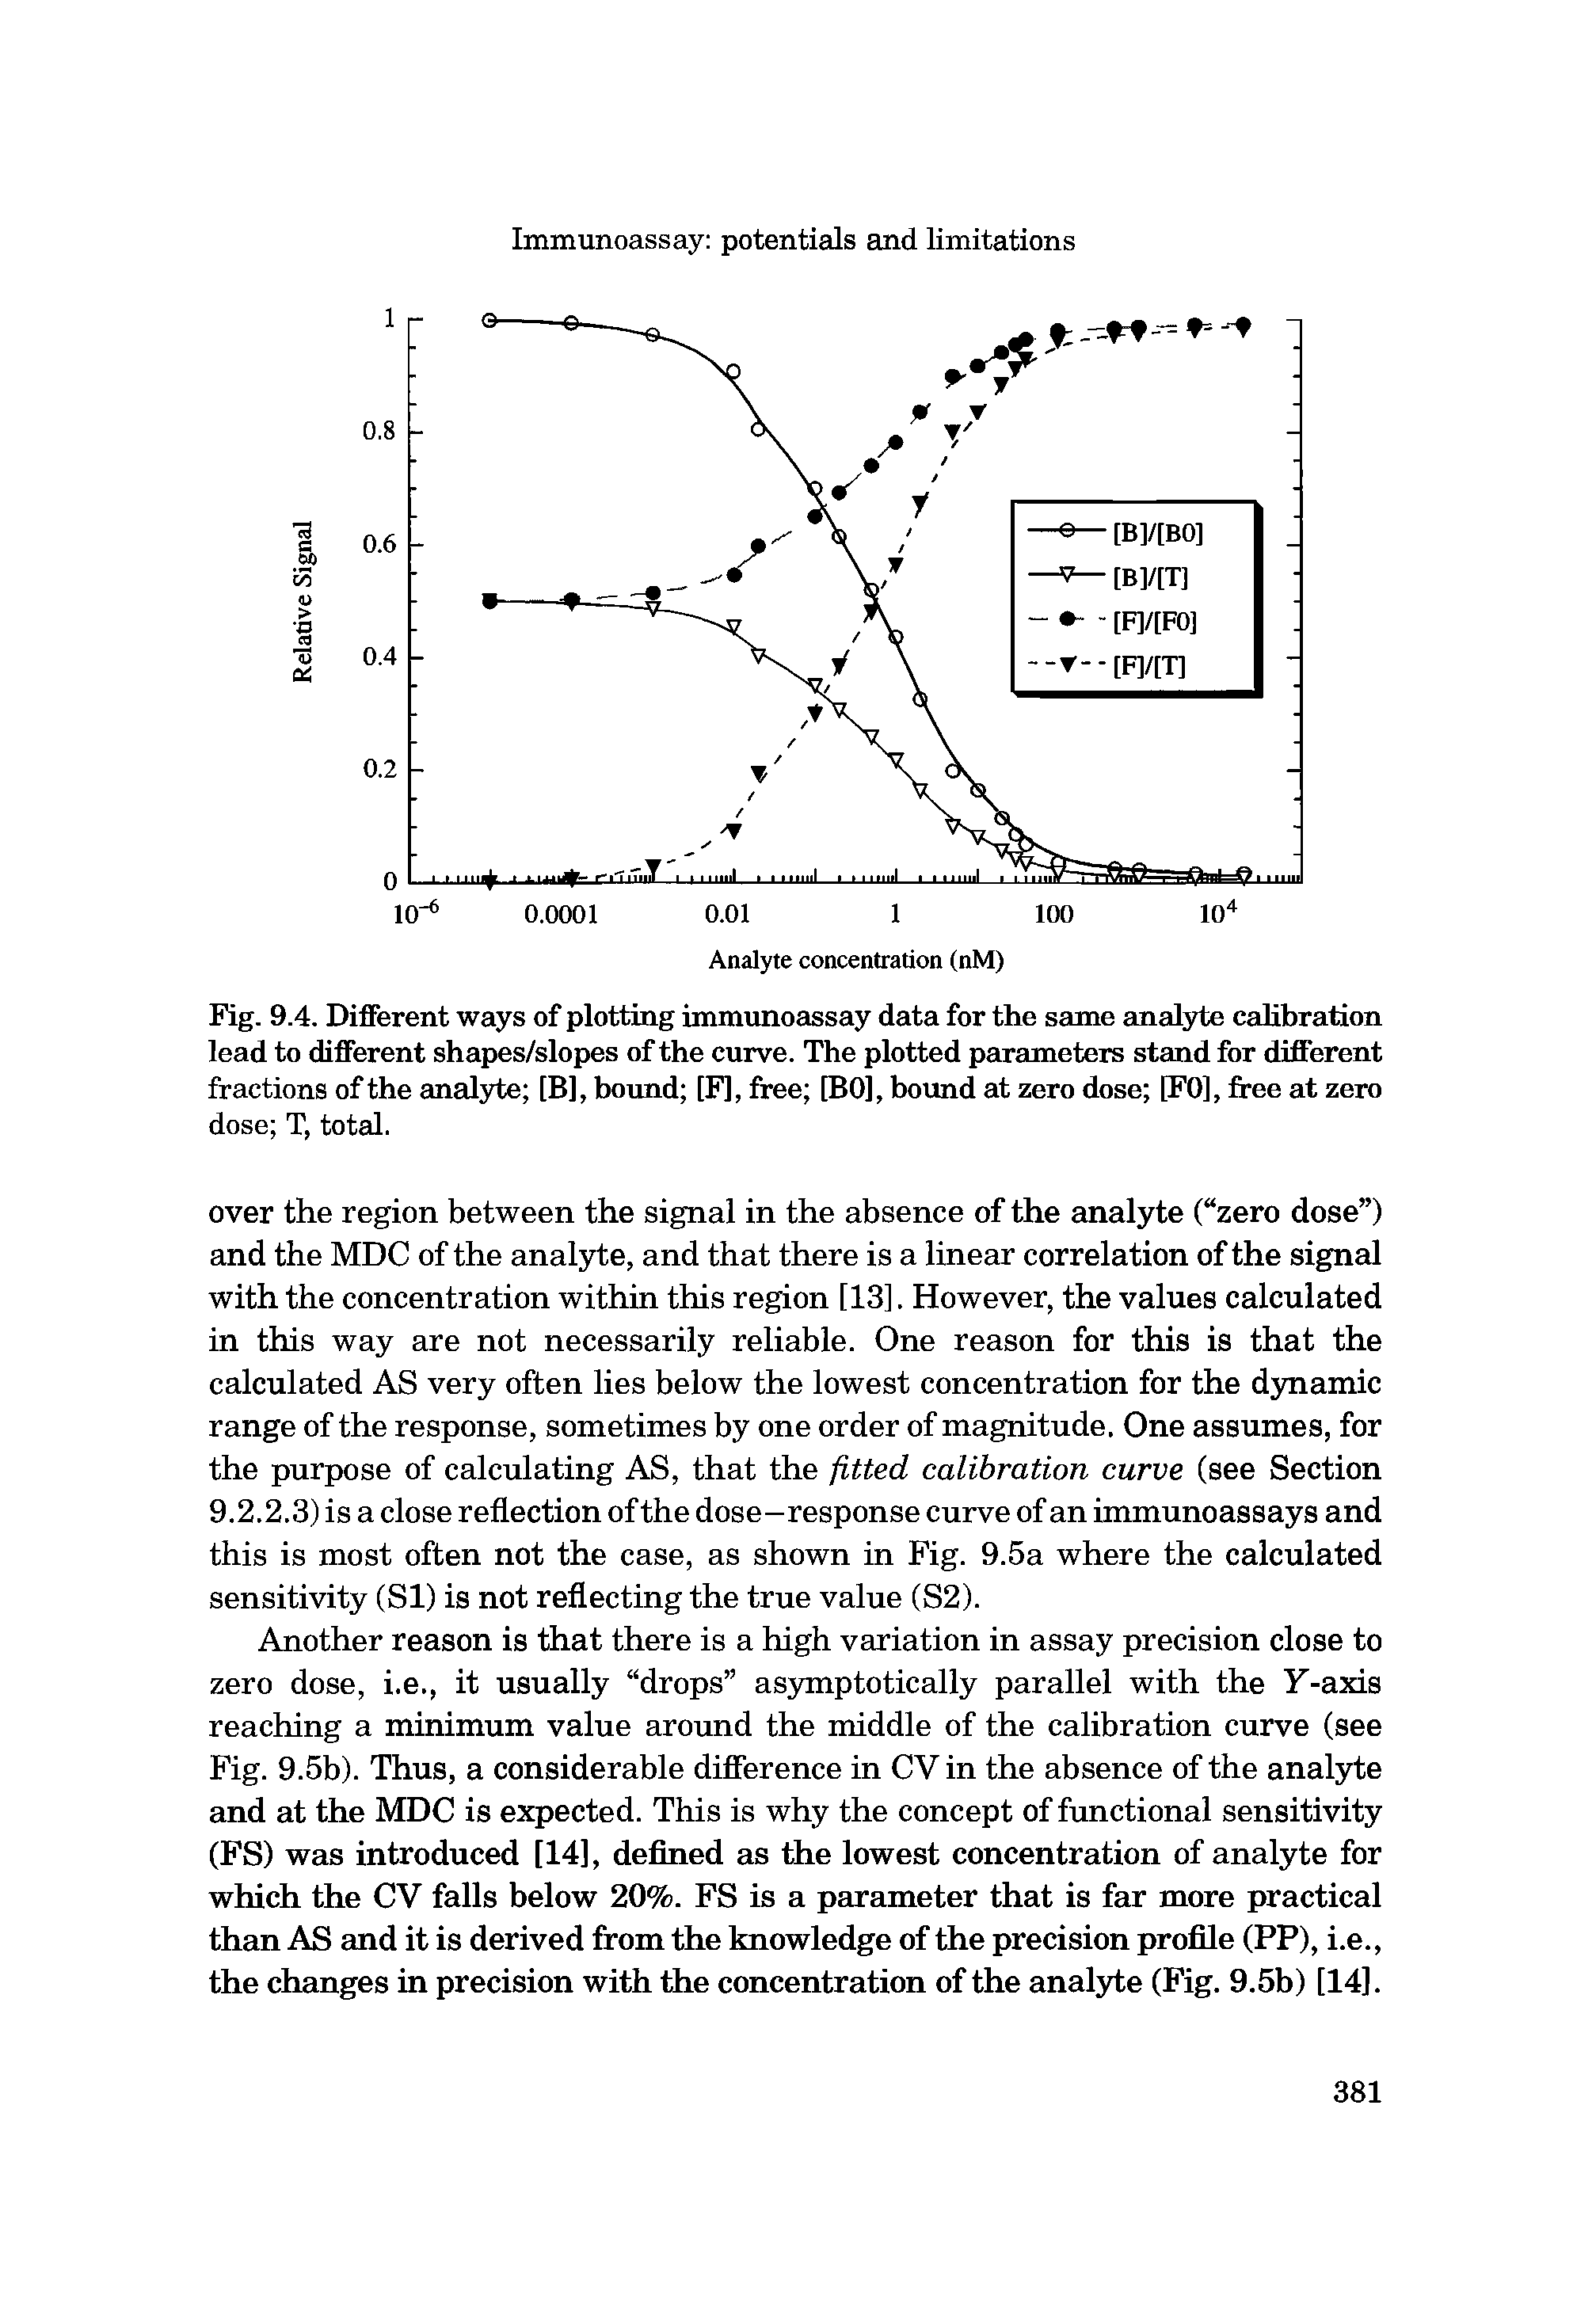 Fig. 9.4. Different ways of plotting immunoassay data for the same anal3d calibration lead to different shapes/slopes of the curve. The plotted parameters stand for different fractions of the anal3de [B], bound [F], free [BO], bound at zero dose [FO], free at zero dose T, total.